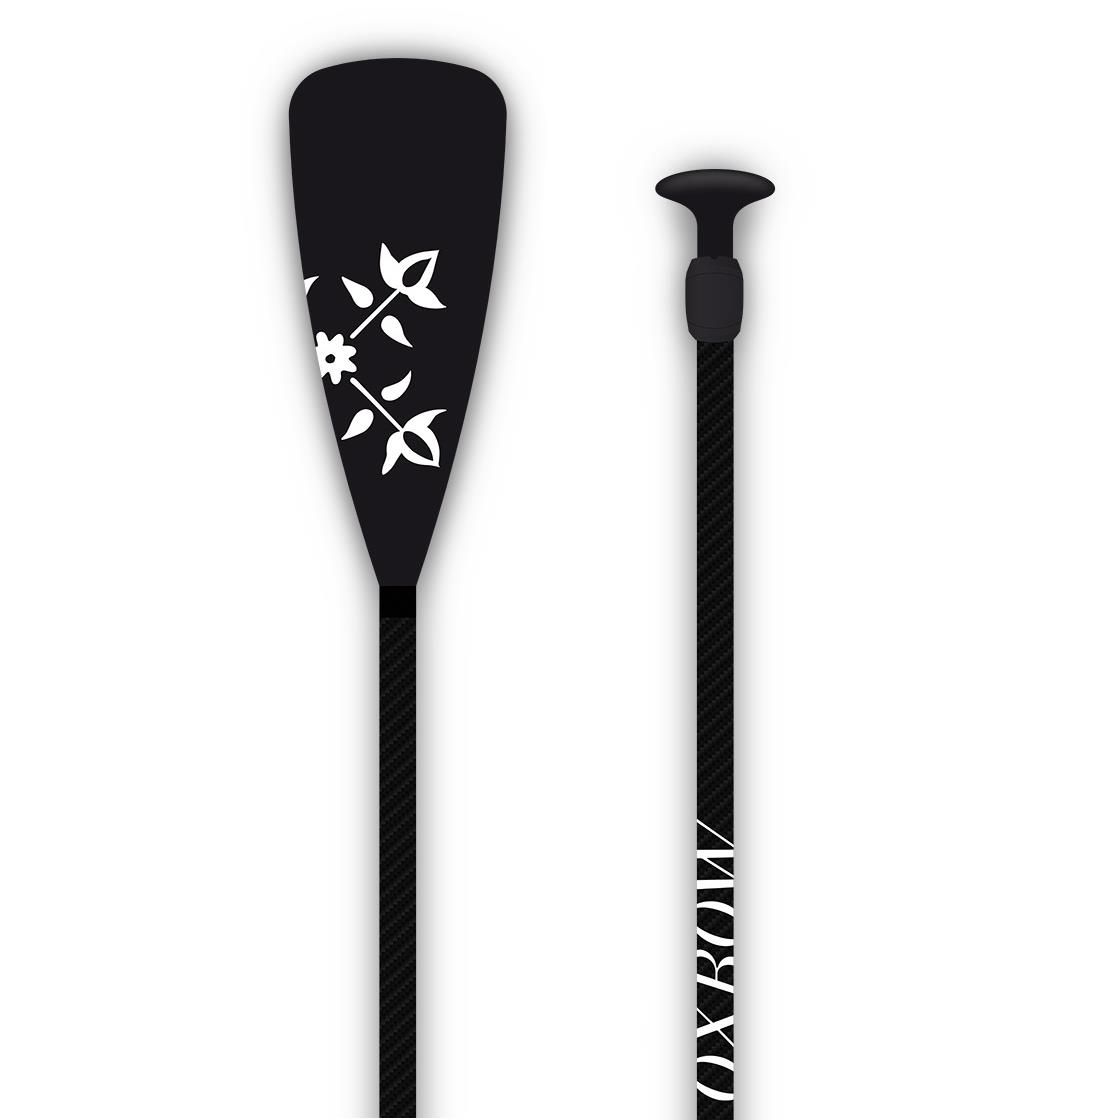 Pagaie de stand up paddle ajustable performer FP